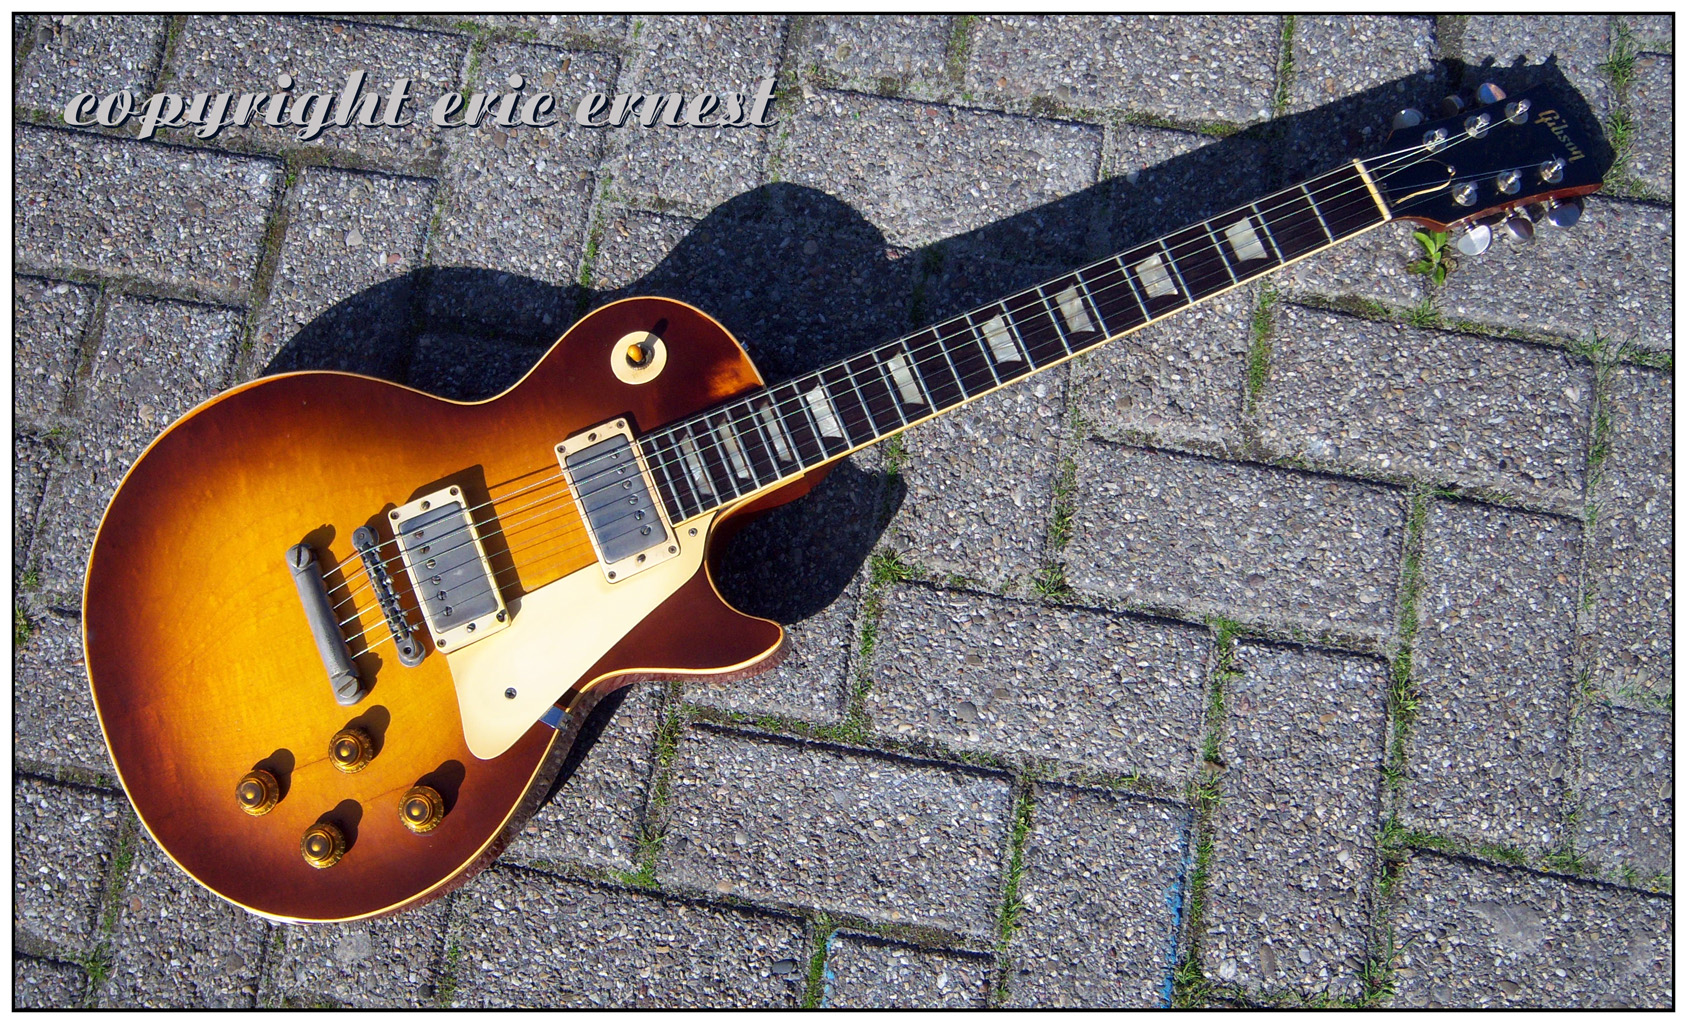 1959 Gibson Les Paul Standard Guitar 9 1259 "Lilley" Burst. Refinished refin PAF parts guitar vintage old repair